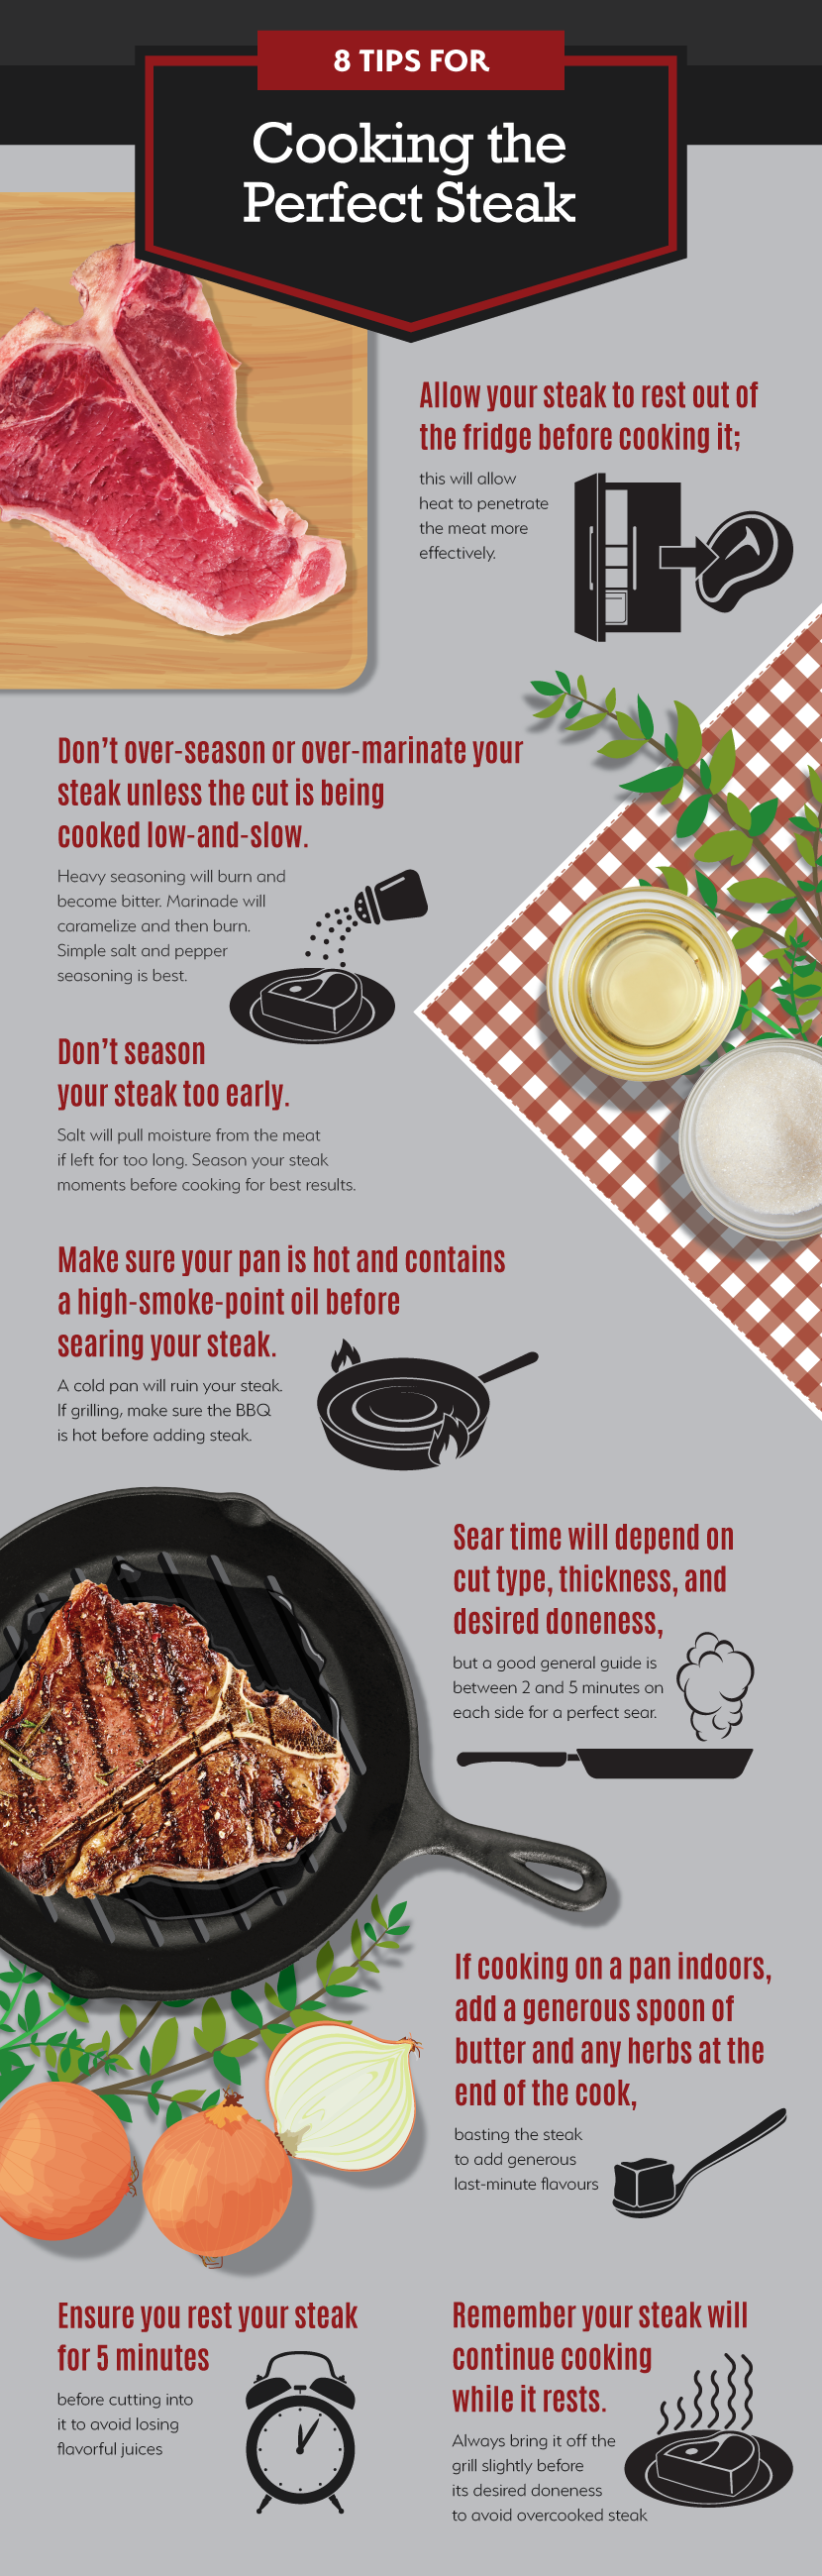 How to Cook Steak - 8 Tips for Cooking Steak